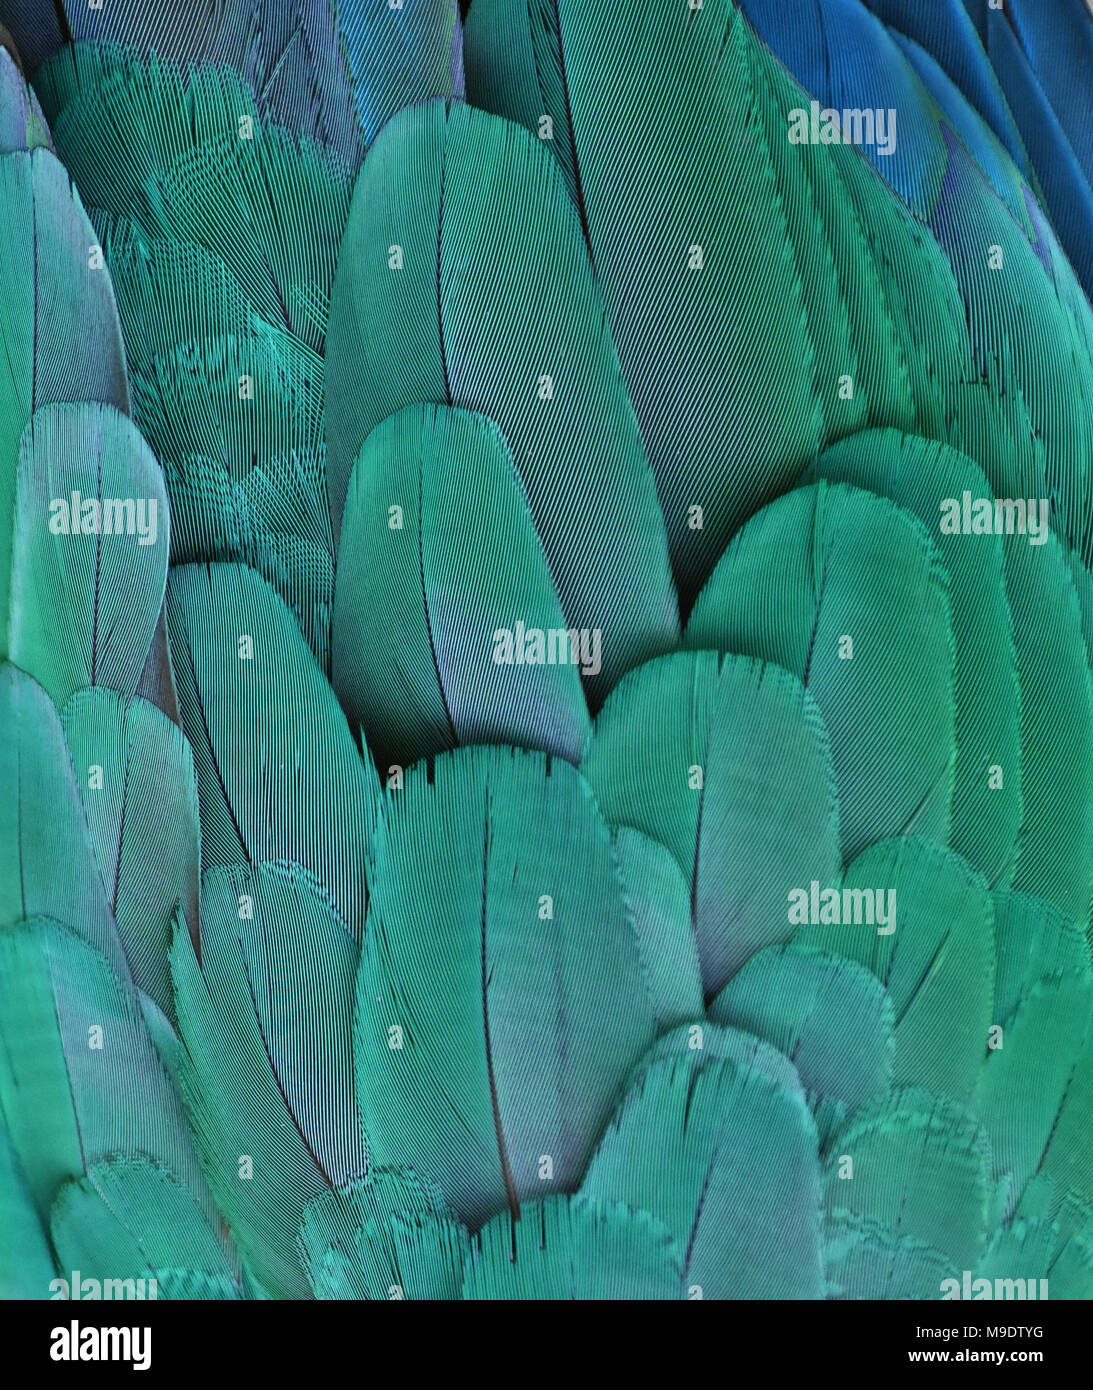 Macro photograph of the blue feathers of a macaw. Stock Photo